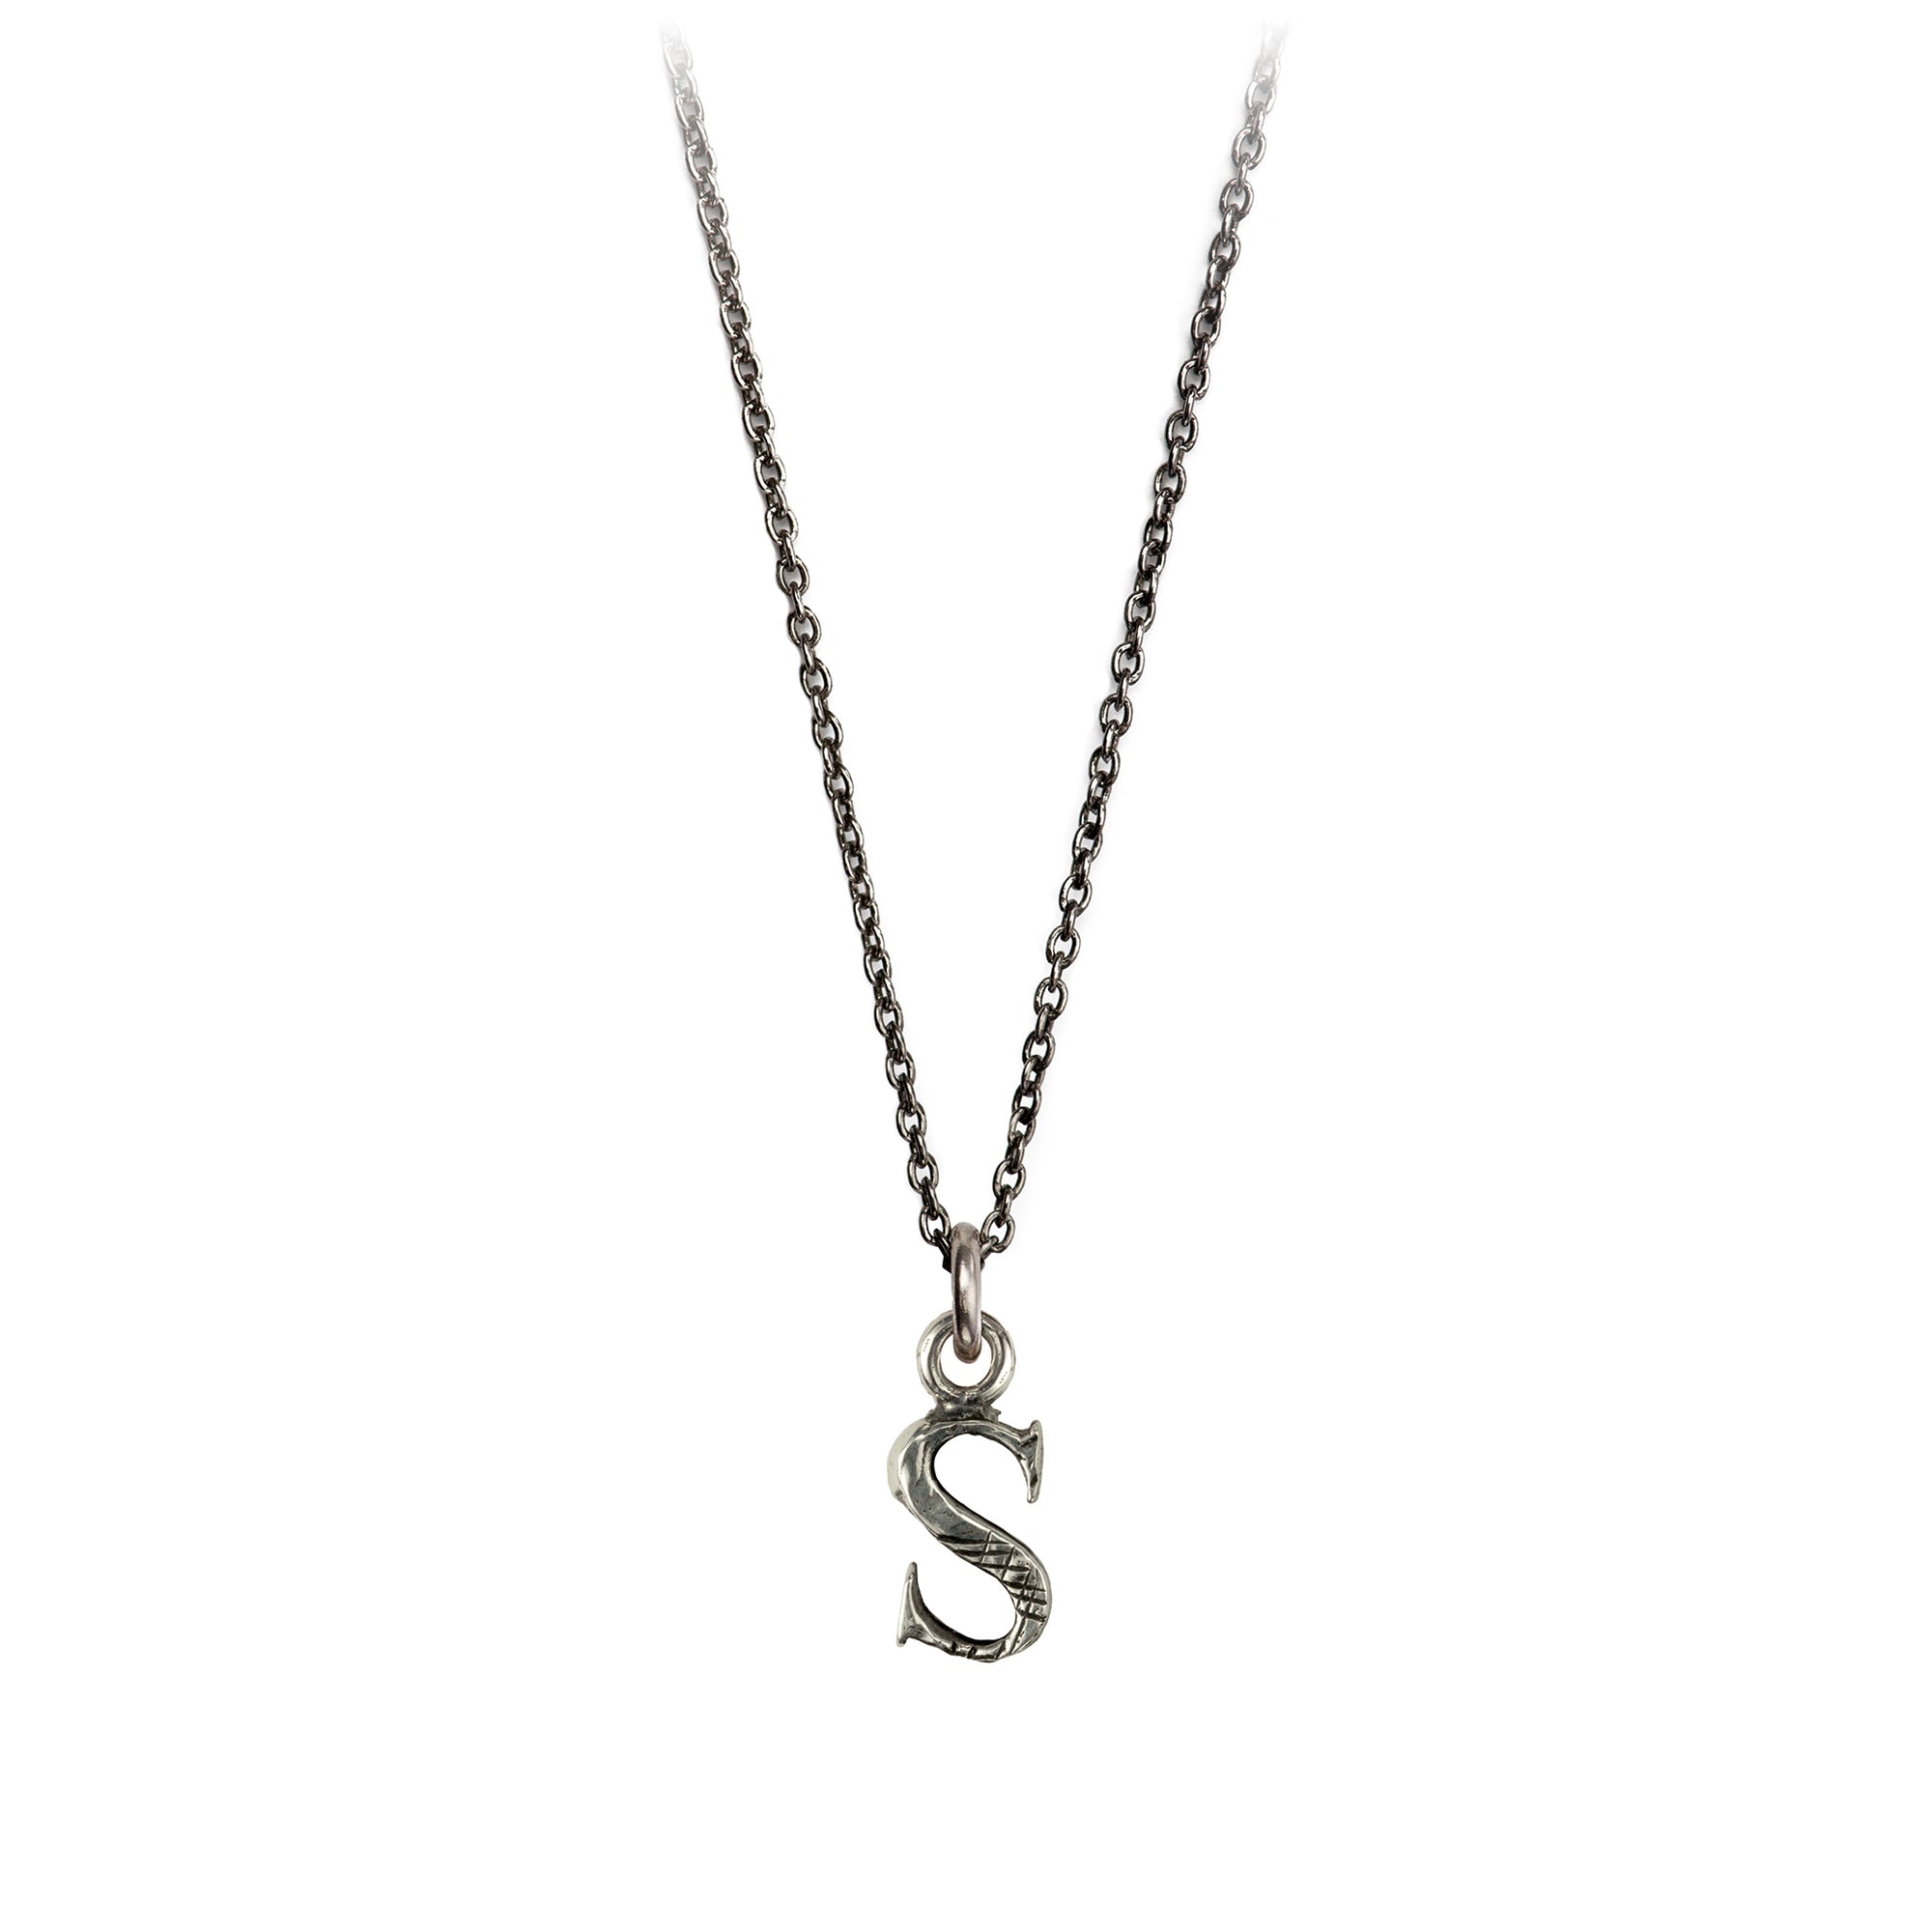 A sterling silver letter "S" charm on a silver chain.